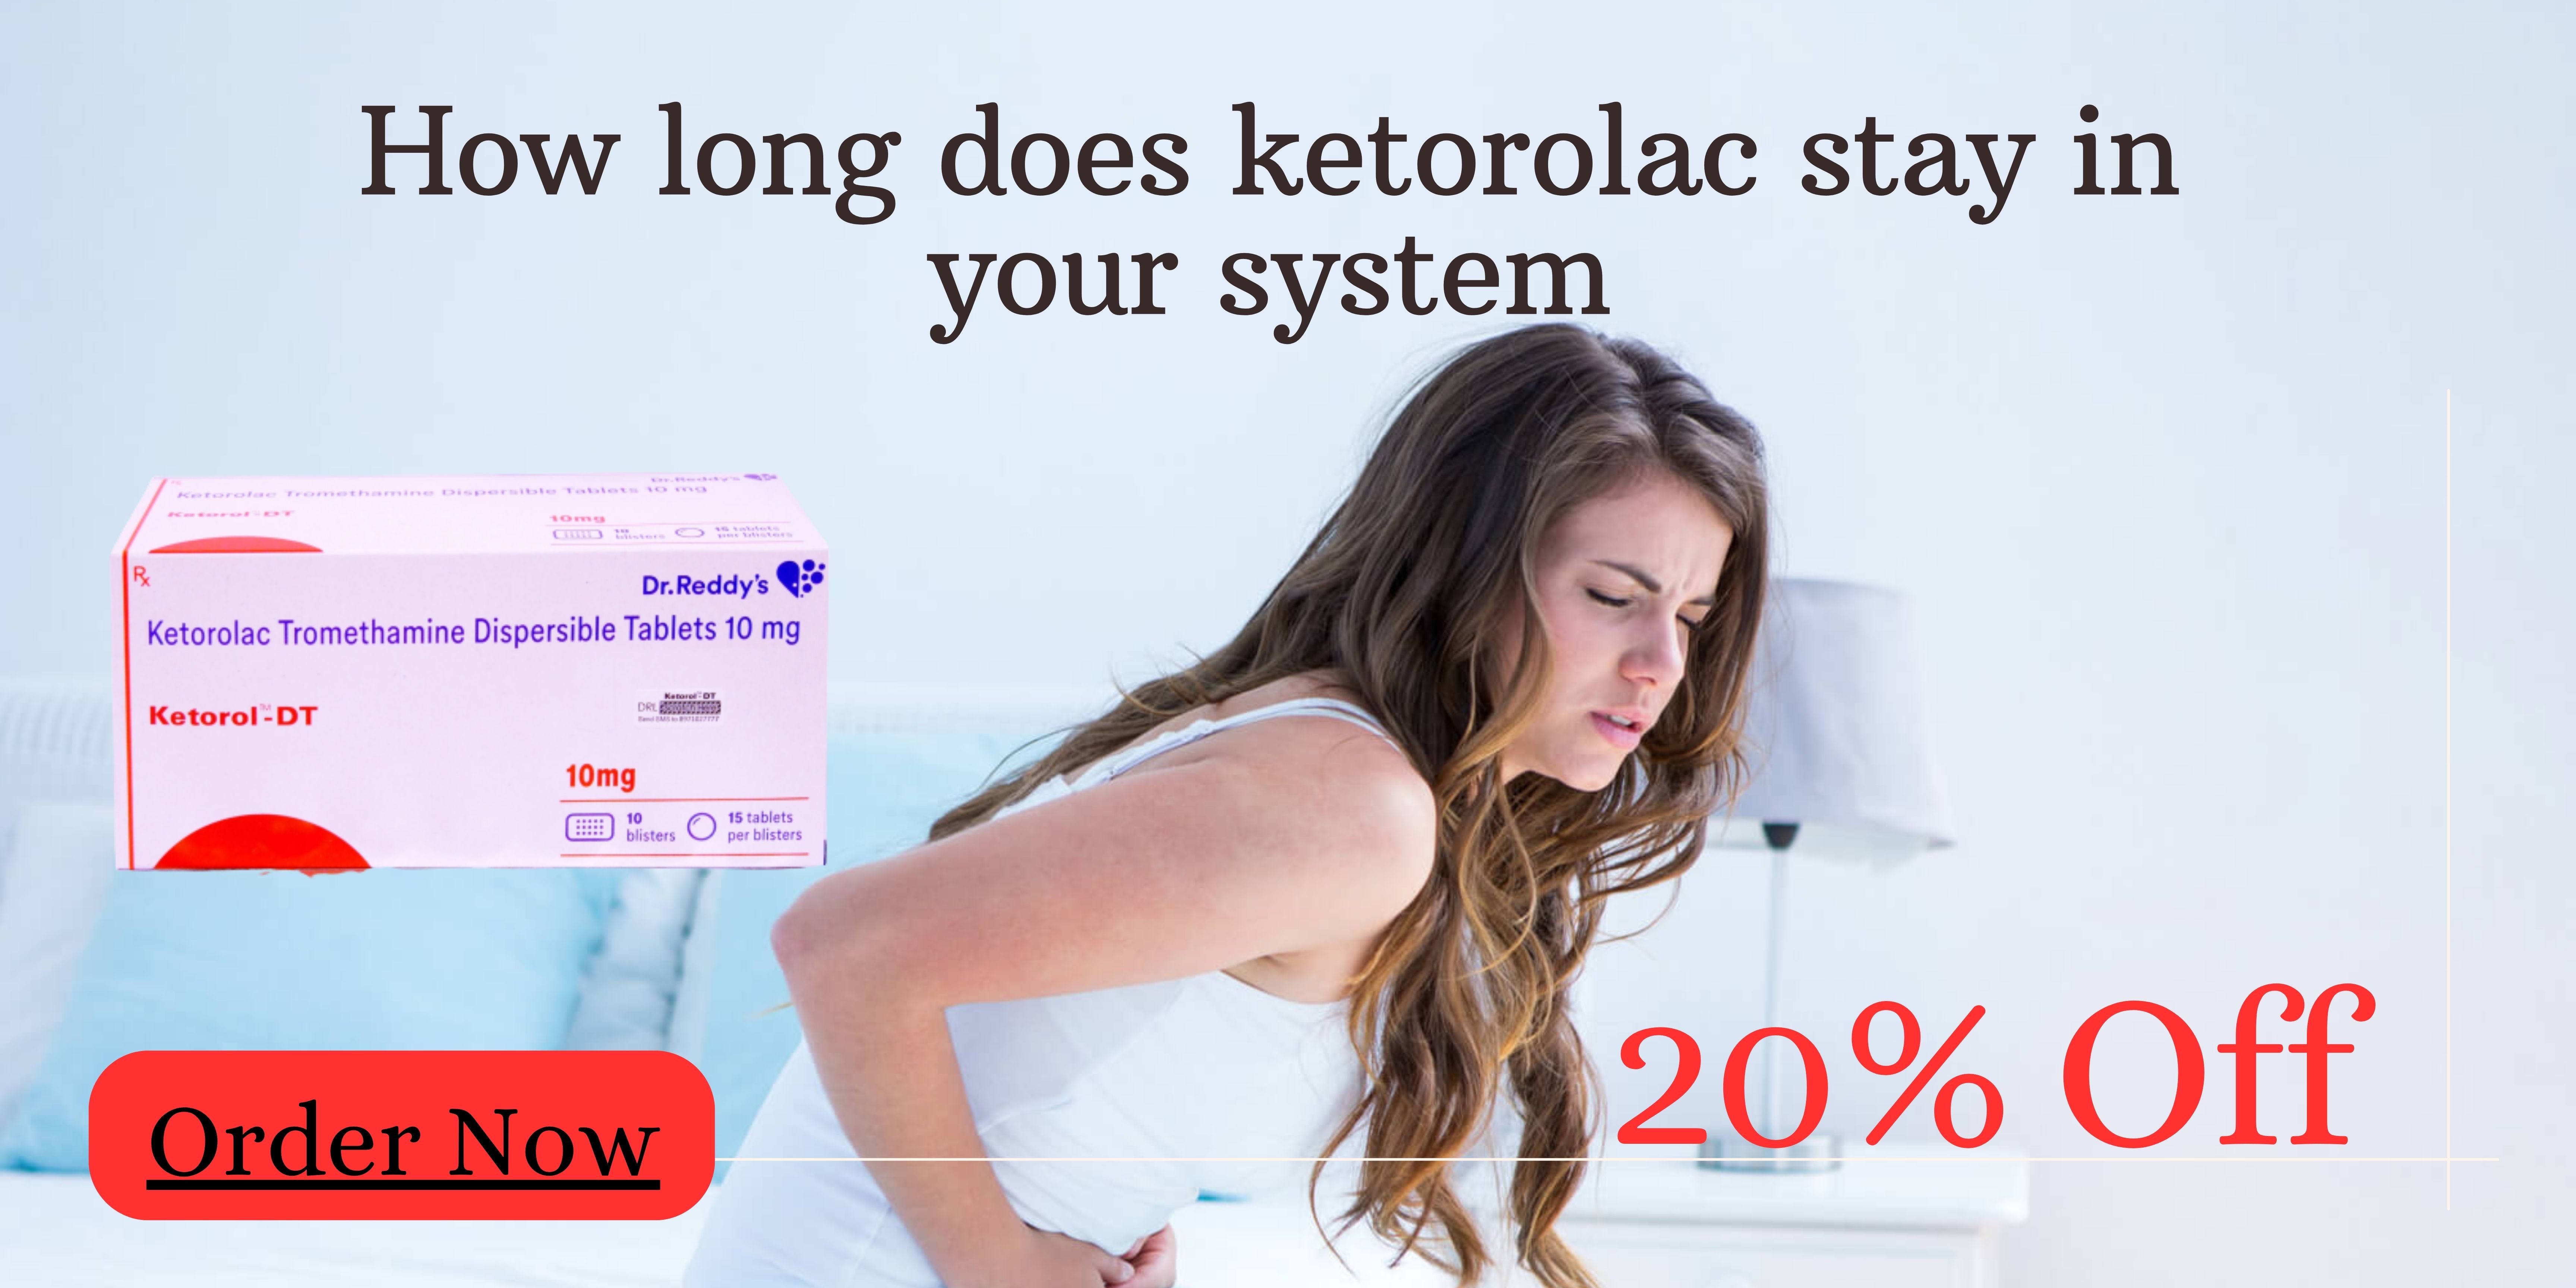 How Long Does Ketorolac Stay in Your System - Unlocking the Mystery